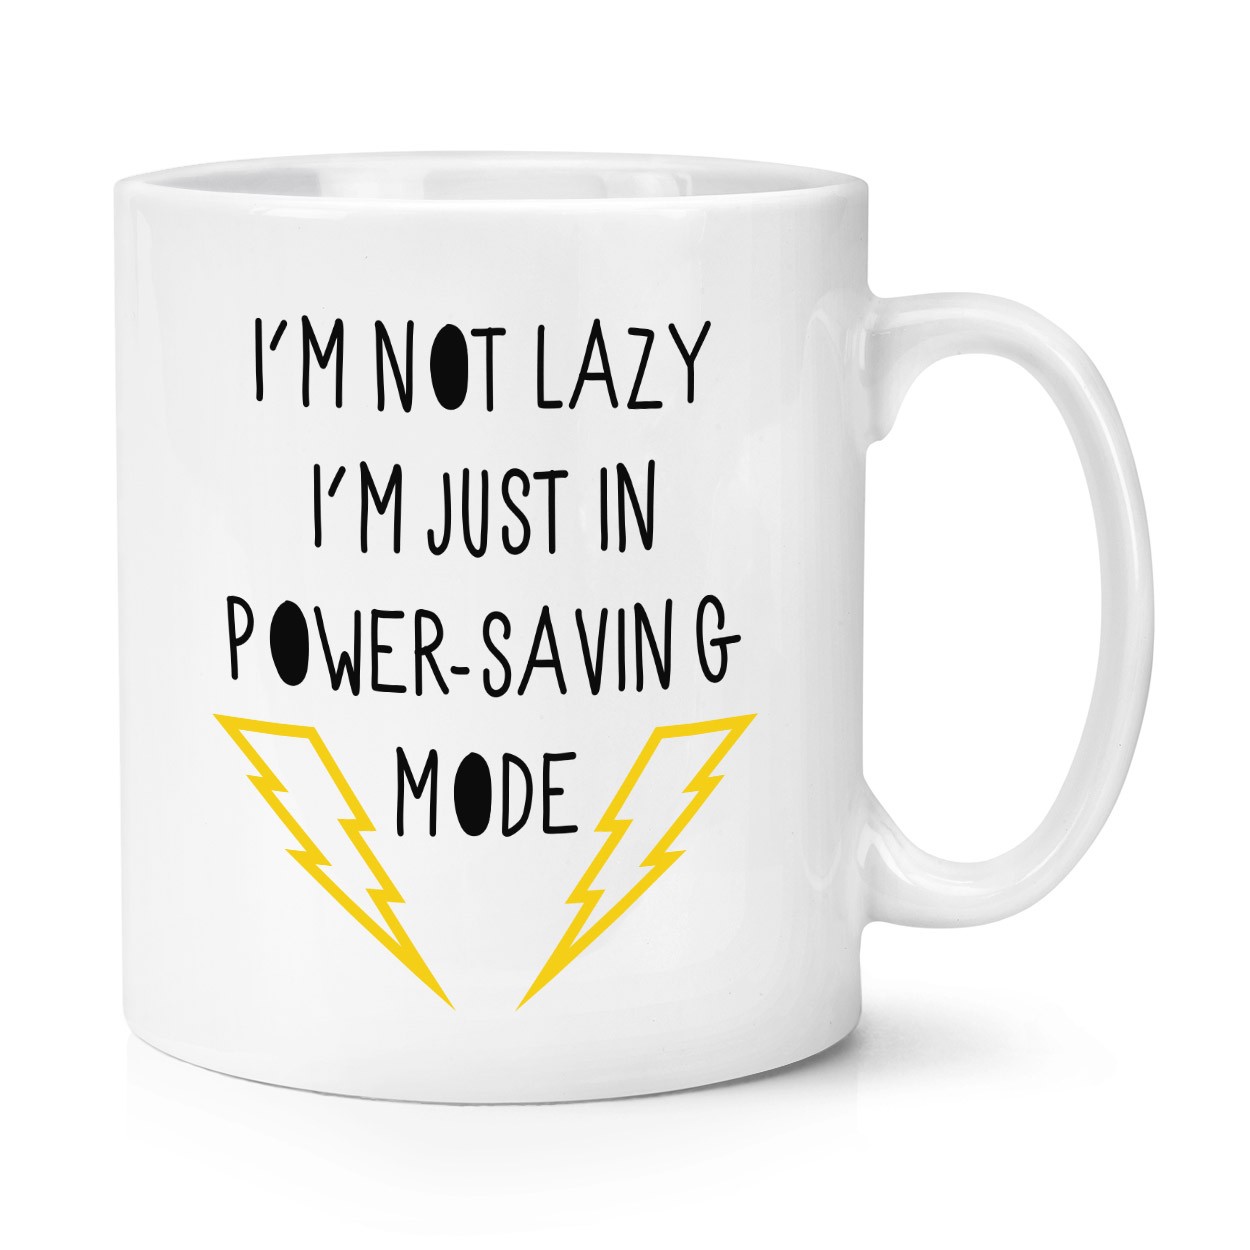 I'm Not Lazy I'm Just In Power-Saving Mode 10oz Mug Cup